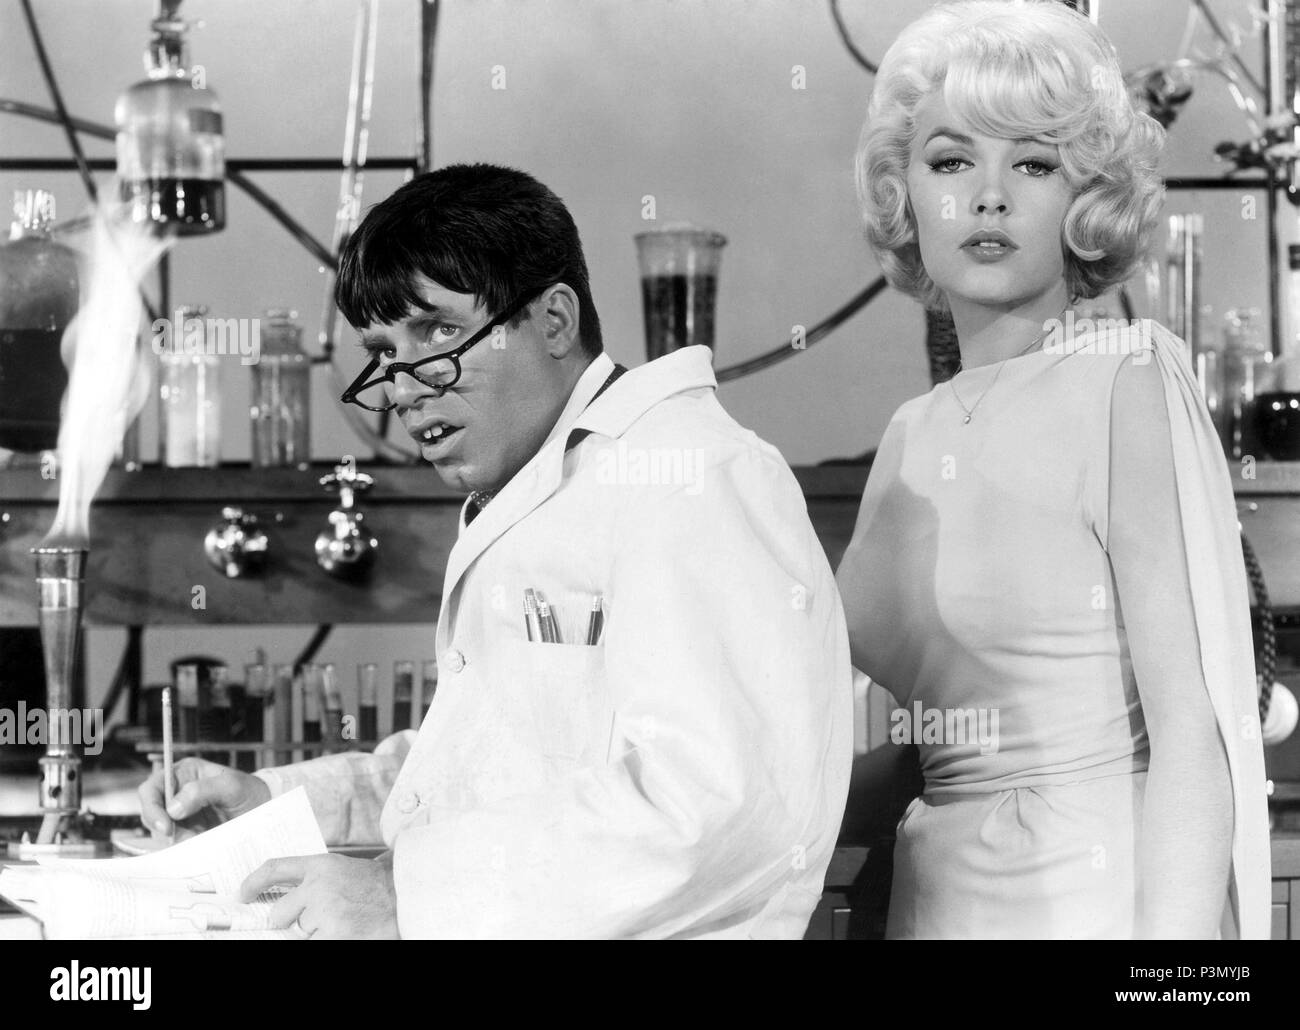 Original Film Title: THE NUTTY PROFESSOR.  English Title: THE NUTTY PROFESSOR.  Film Director: JERRY LEWIS.  Year: 1963.  Stars: JERRY LEWIS; STELLA STEVENS. Credit: PARAMOUNT PICTURES / Album Stock Photo